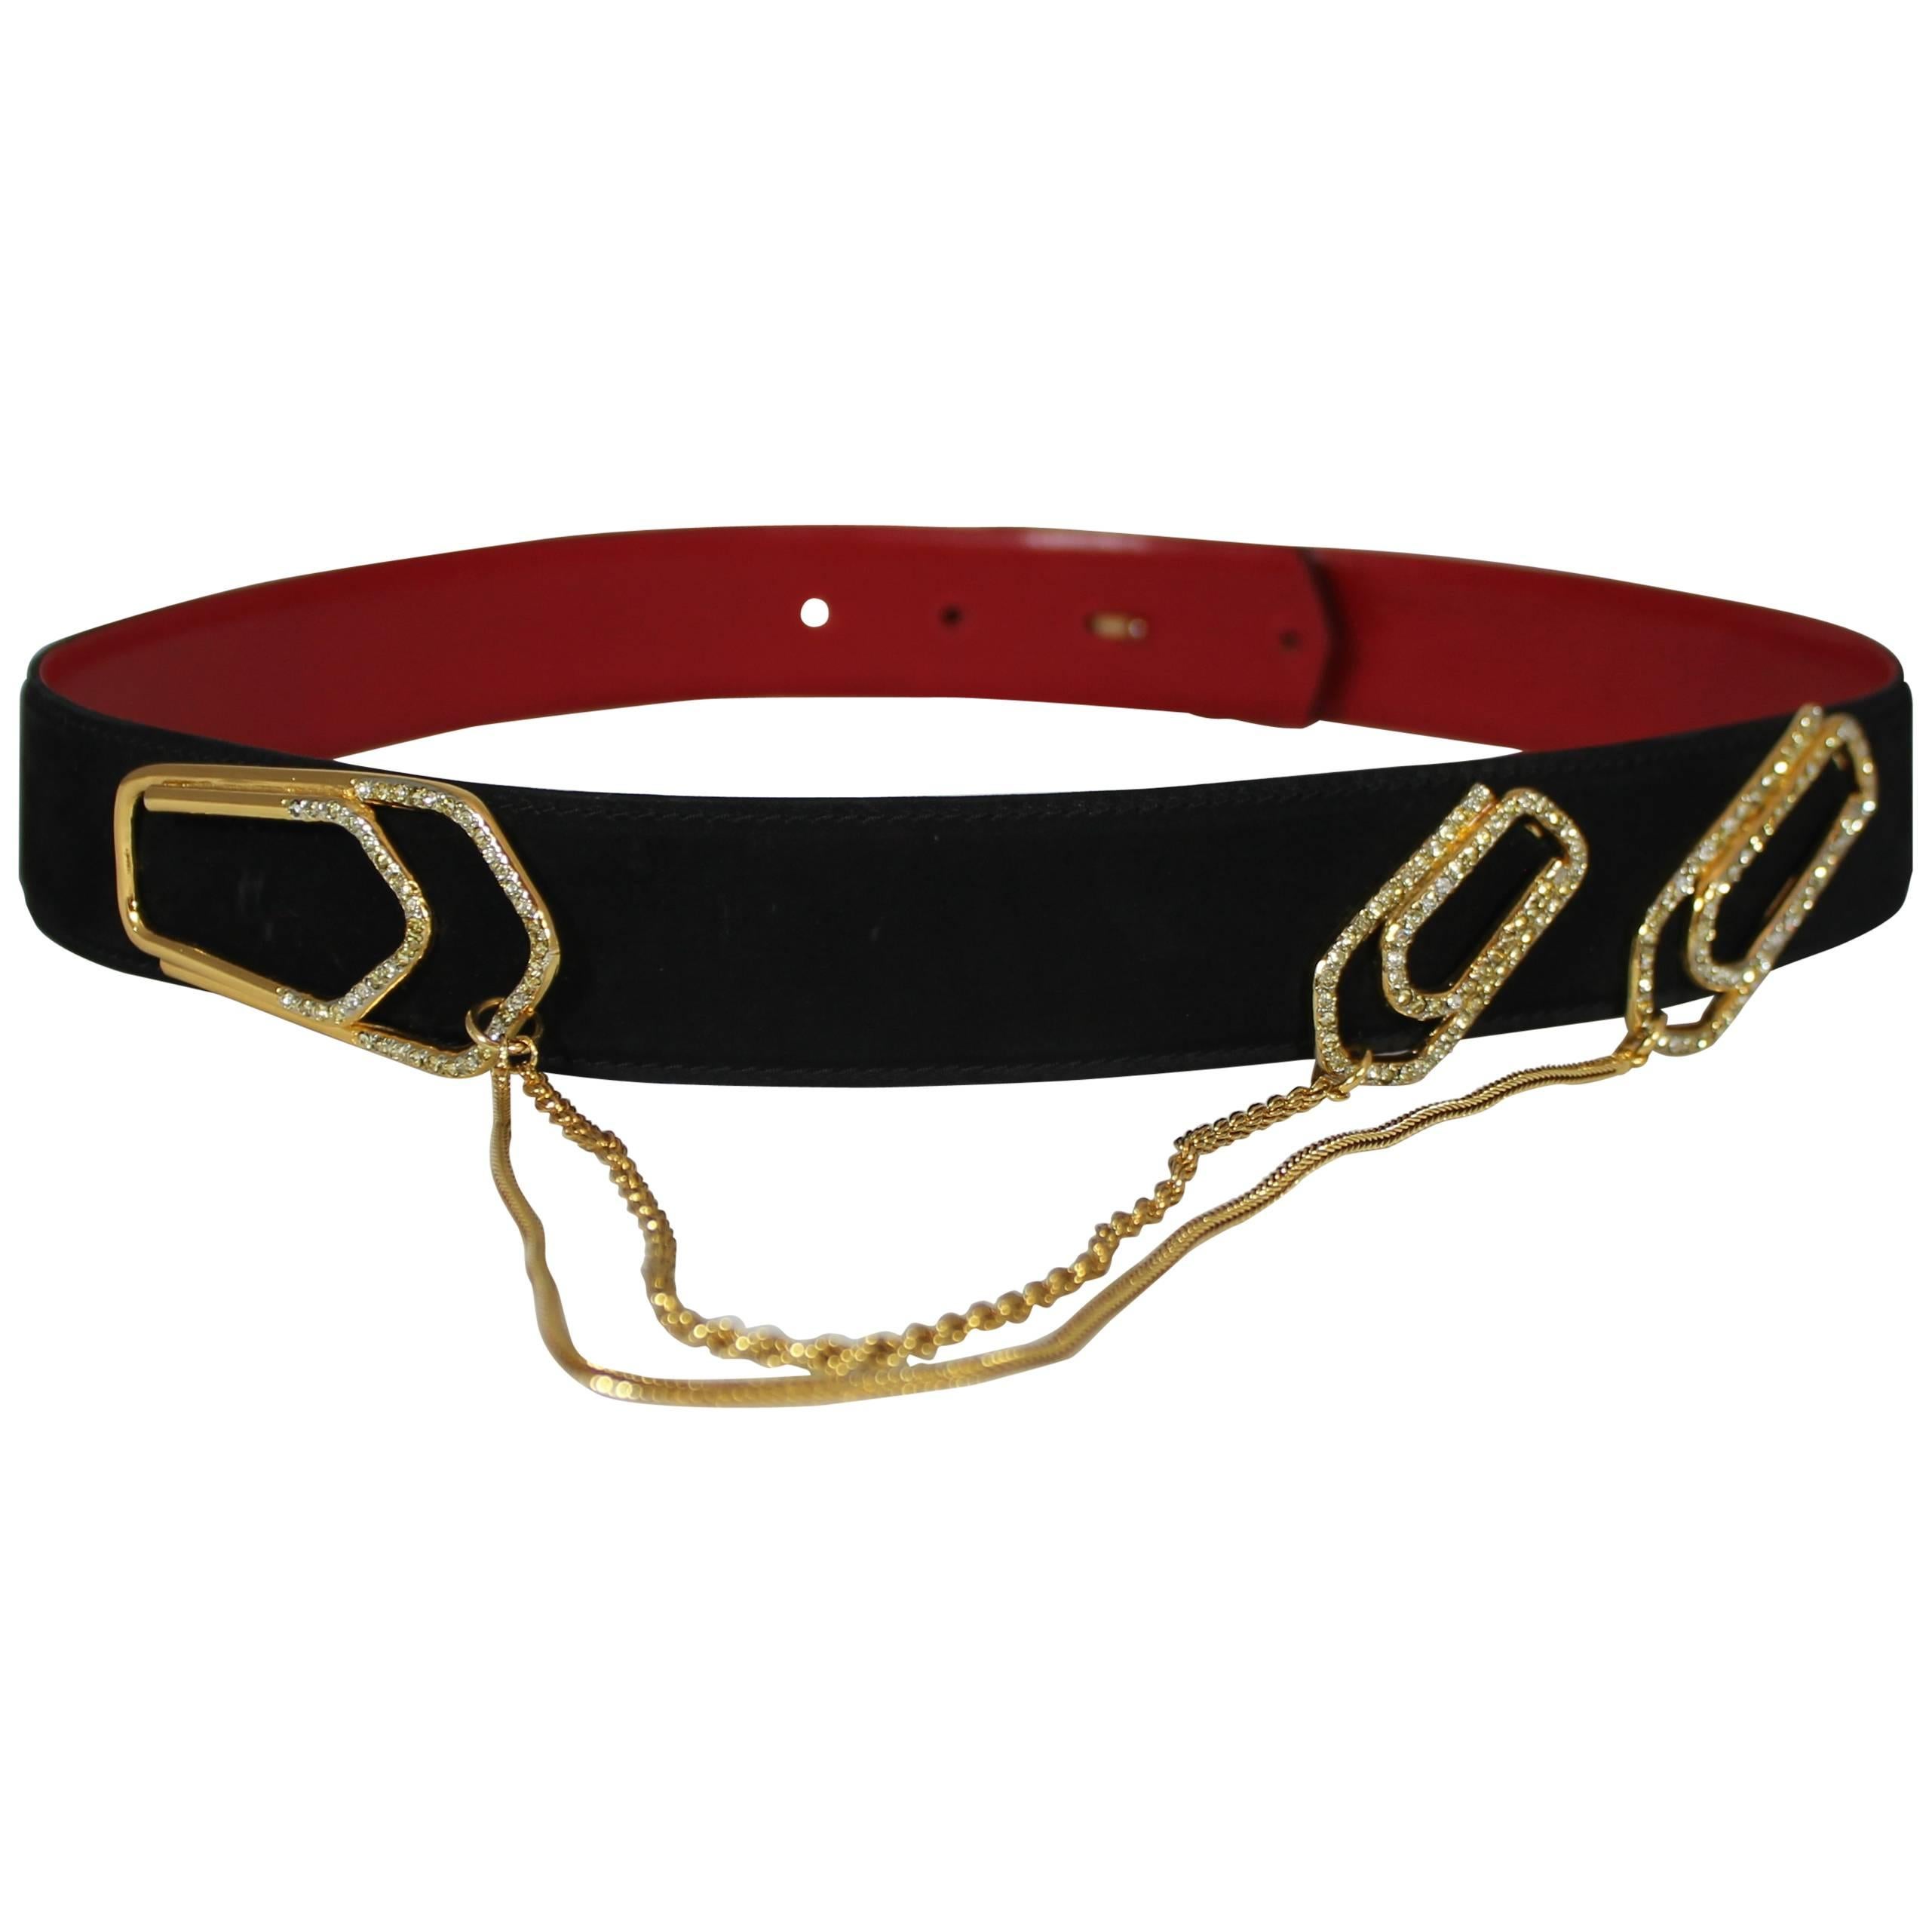 Valentino Couture Black Suede Belt with Gold Chains and Rhinestone Paperclips